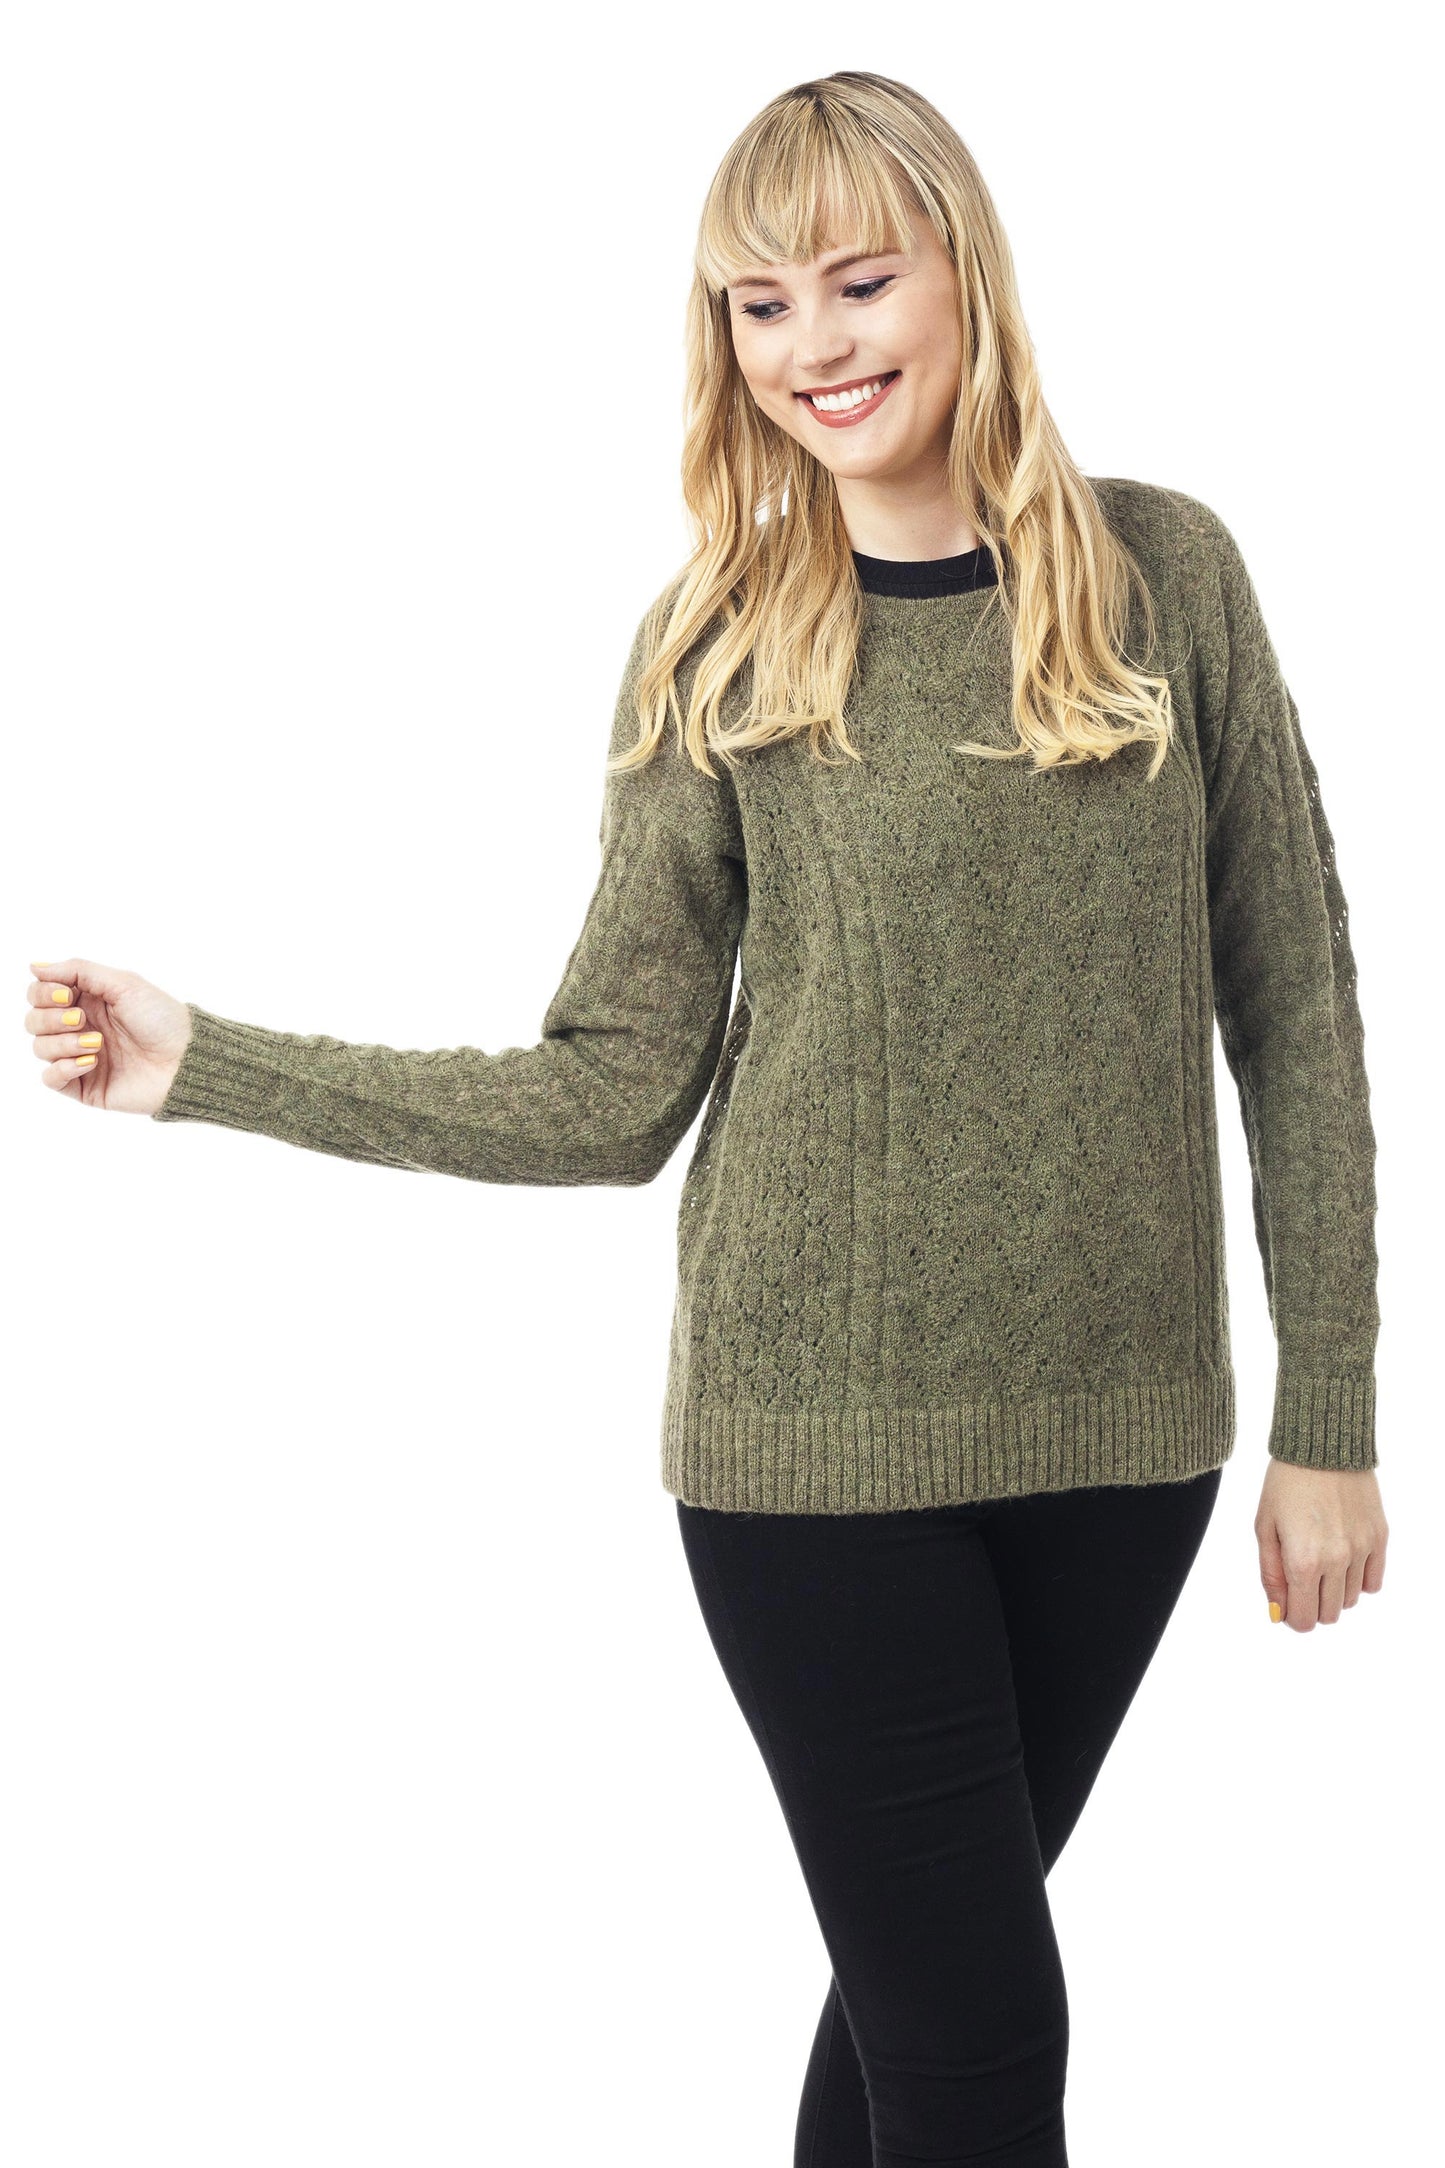 Warm Charm in Olive Cable Knit Baby Apaca Blend Pullover in Olive from Peru